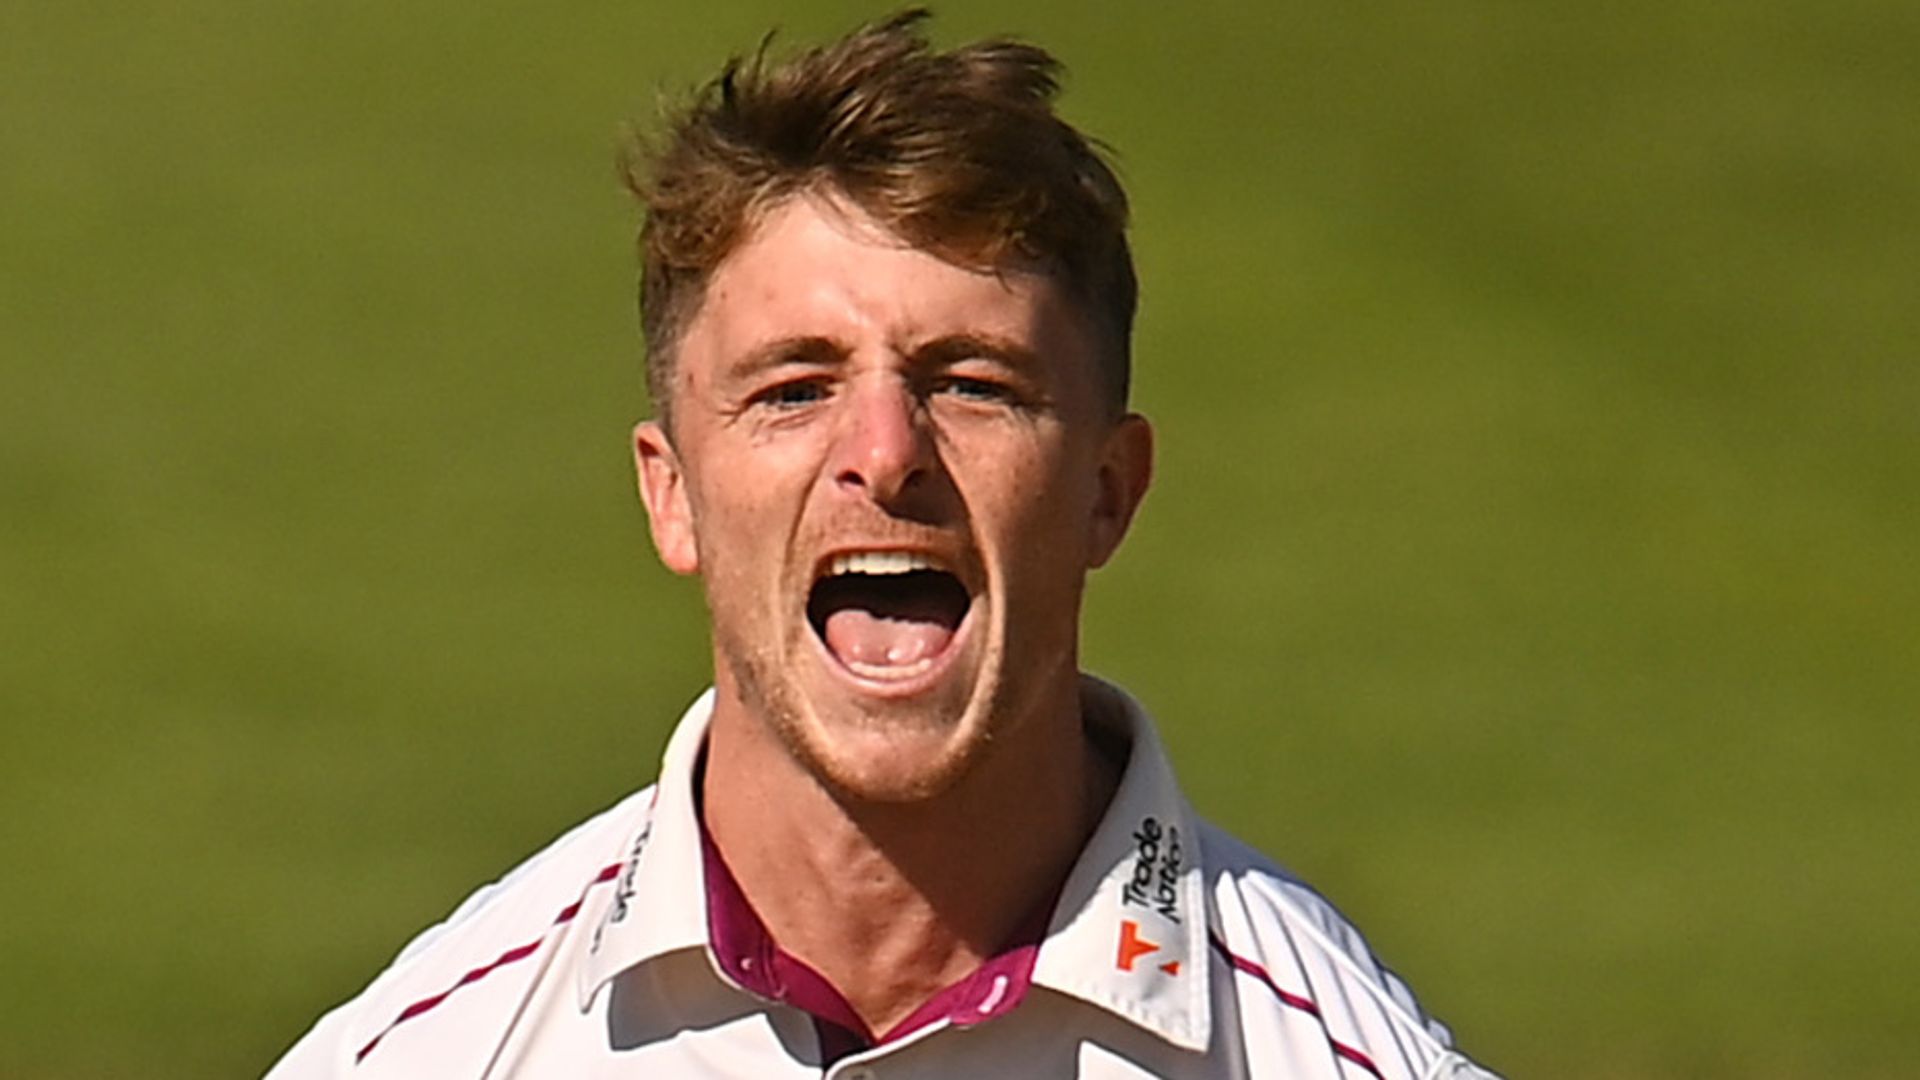 Somerset thrash Northamptonshire to seal Division One survival